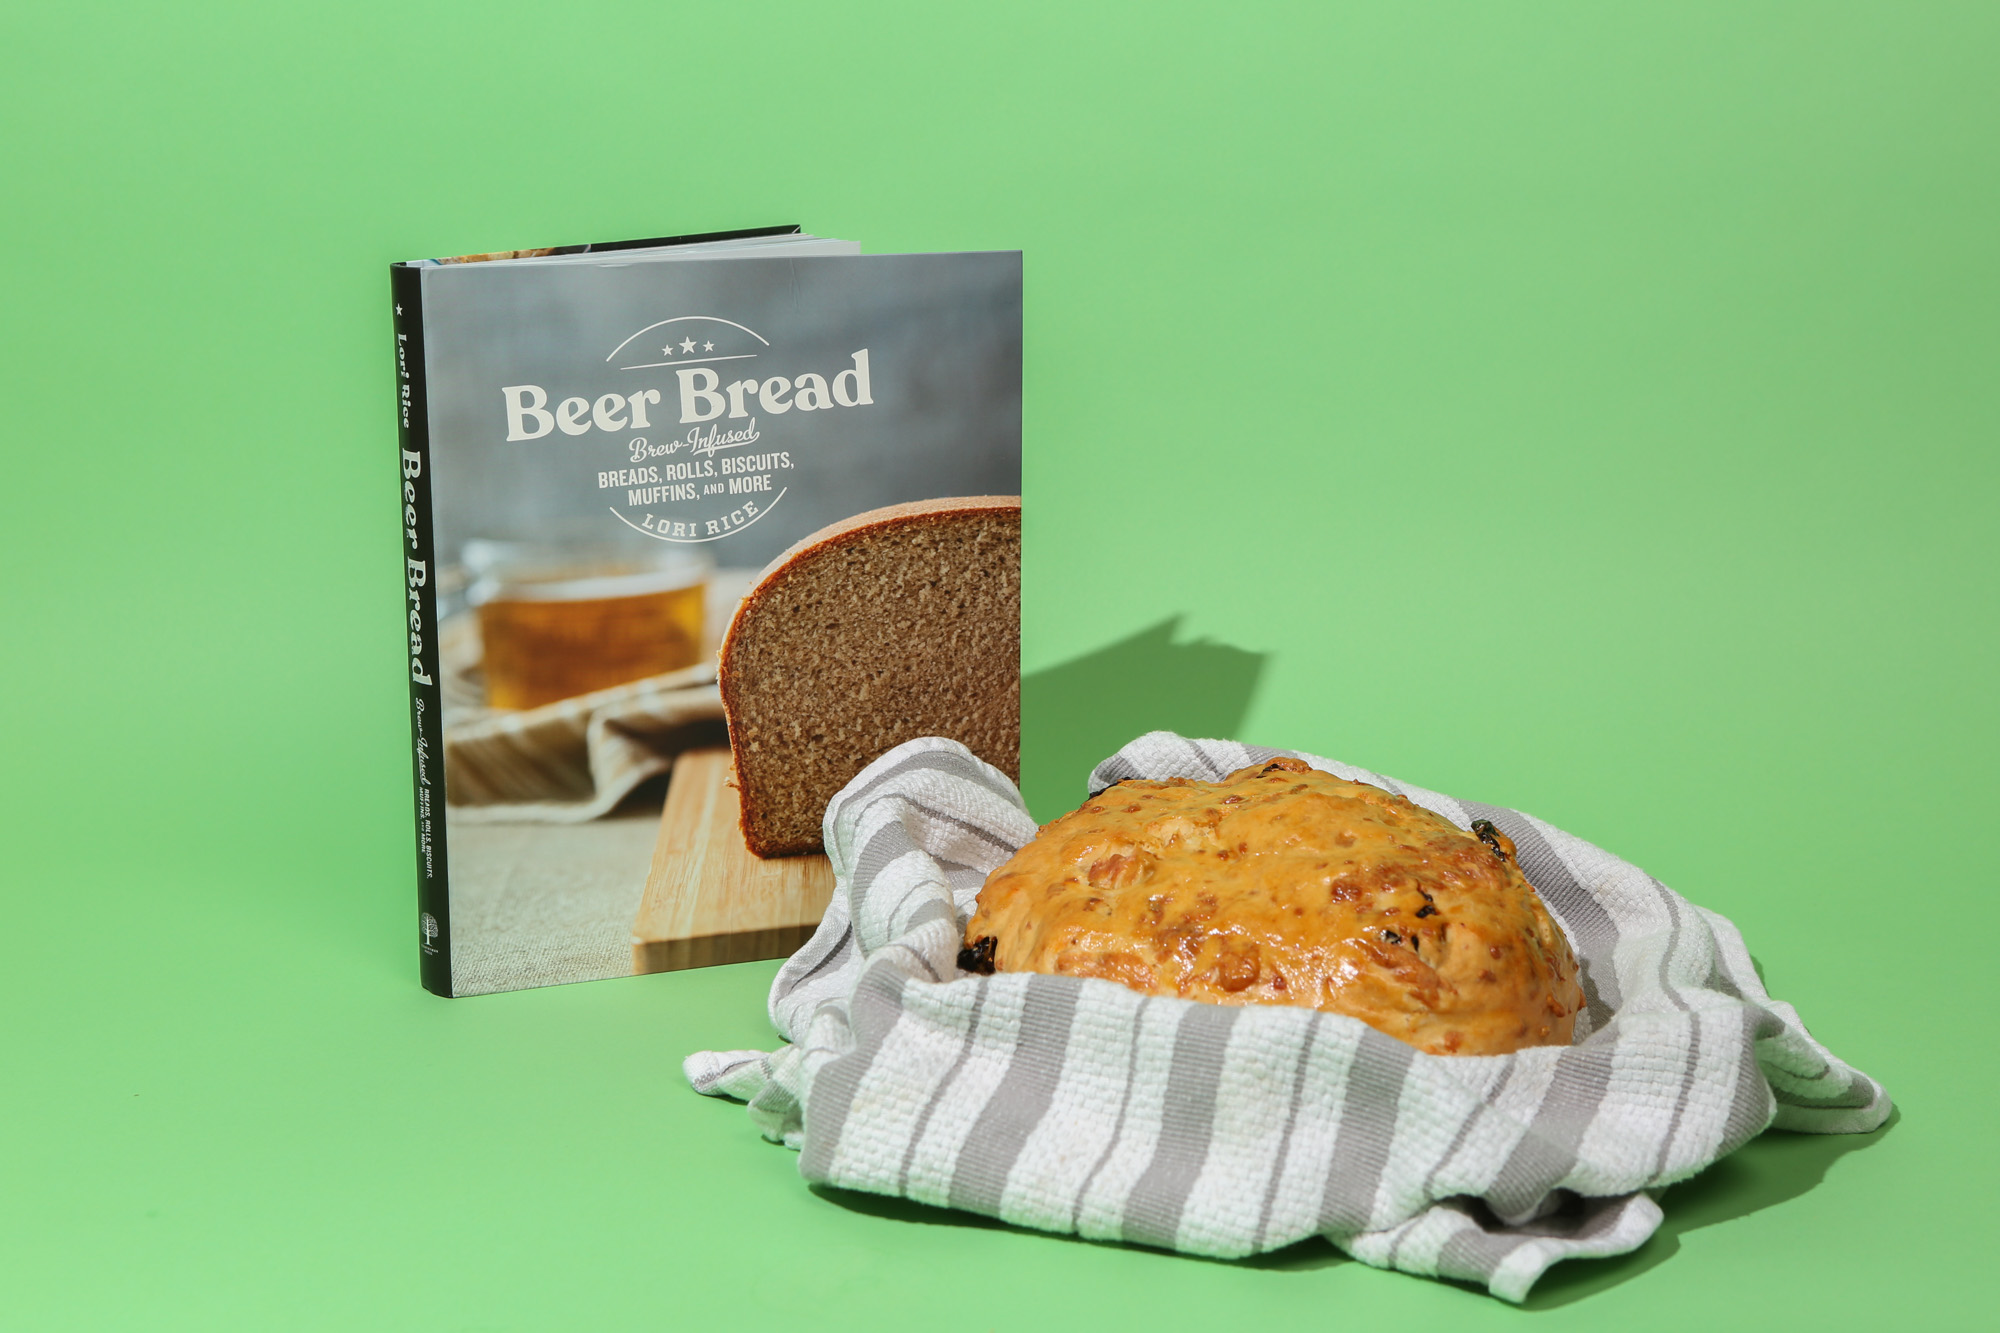 Book Review: How to Make Beer Bread